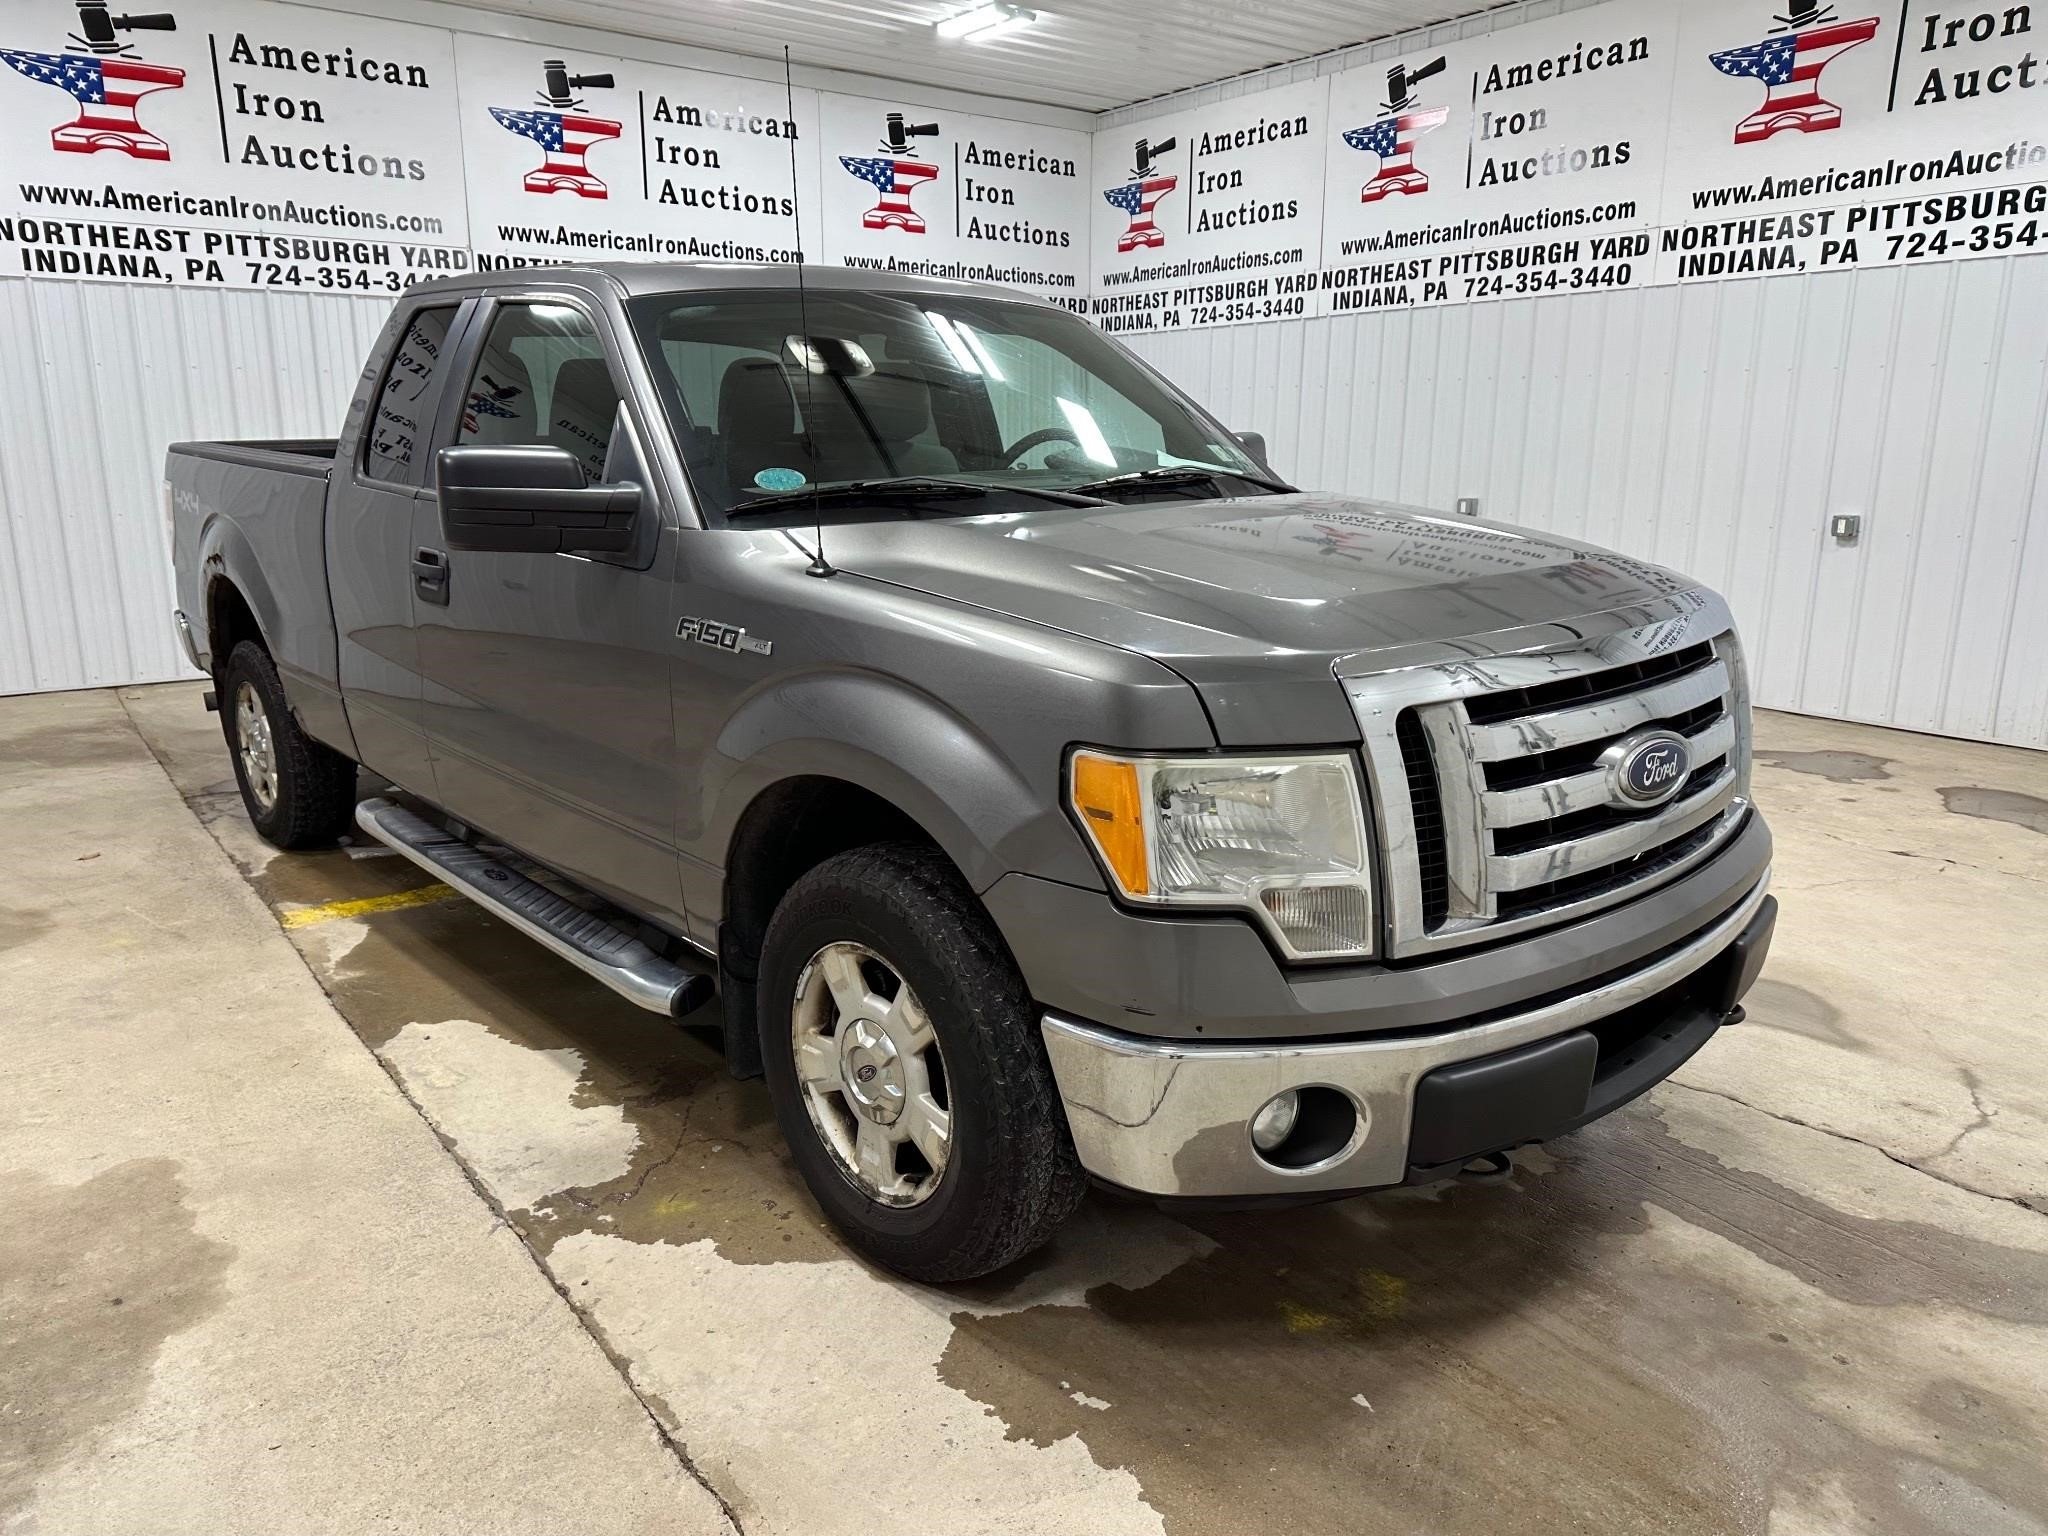 2011 Ford F 150 XL Truck- Titled-NO RESERVE